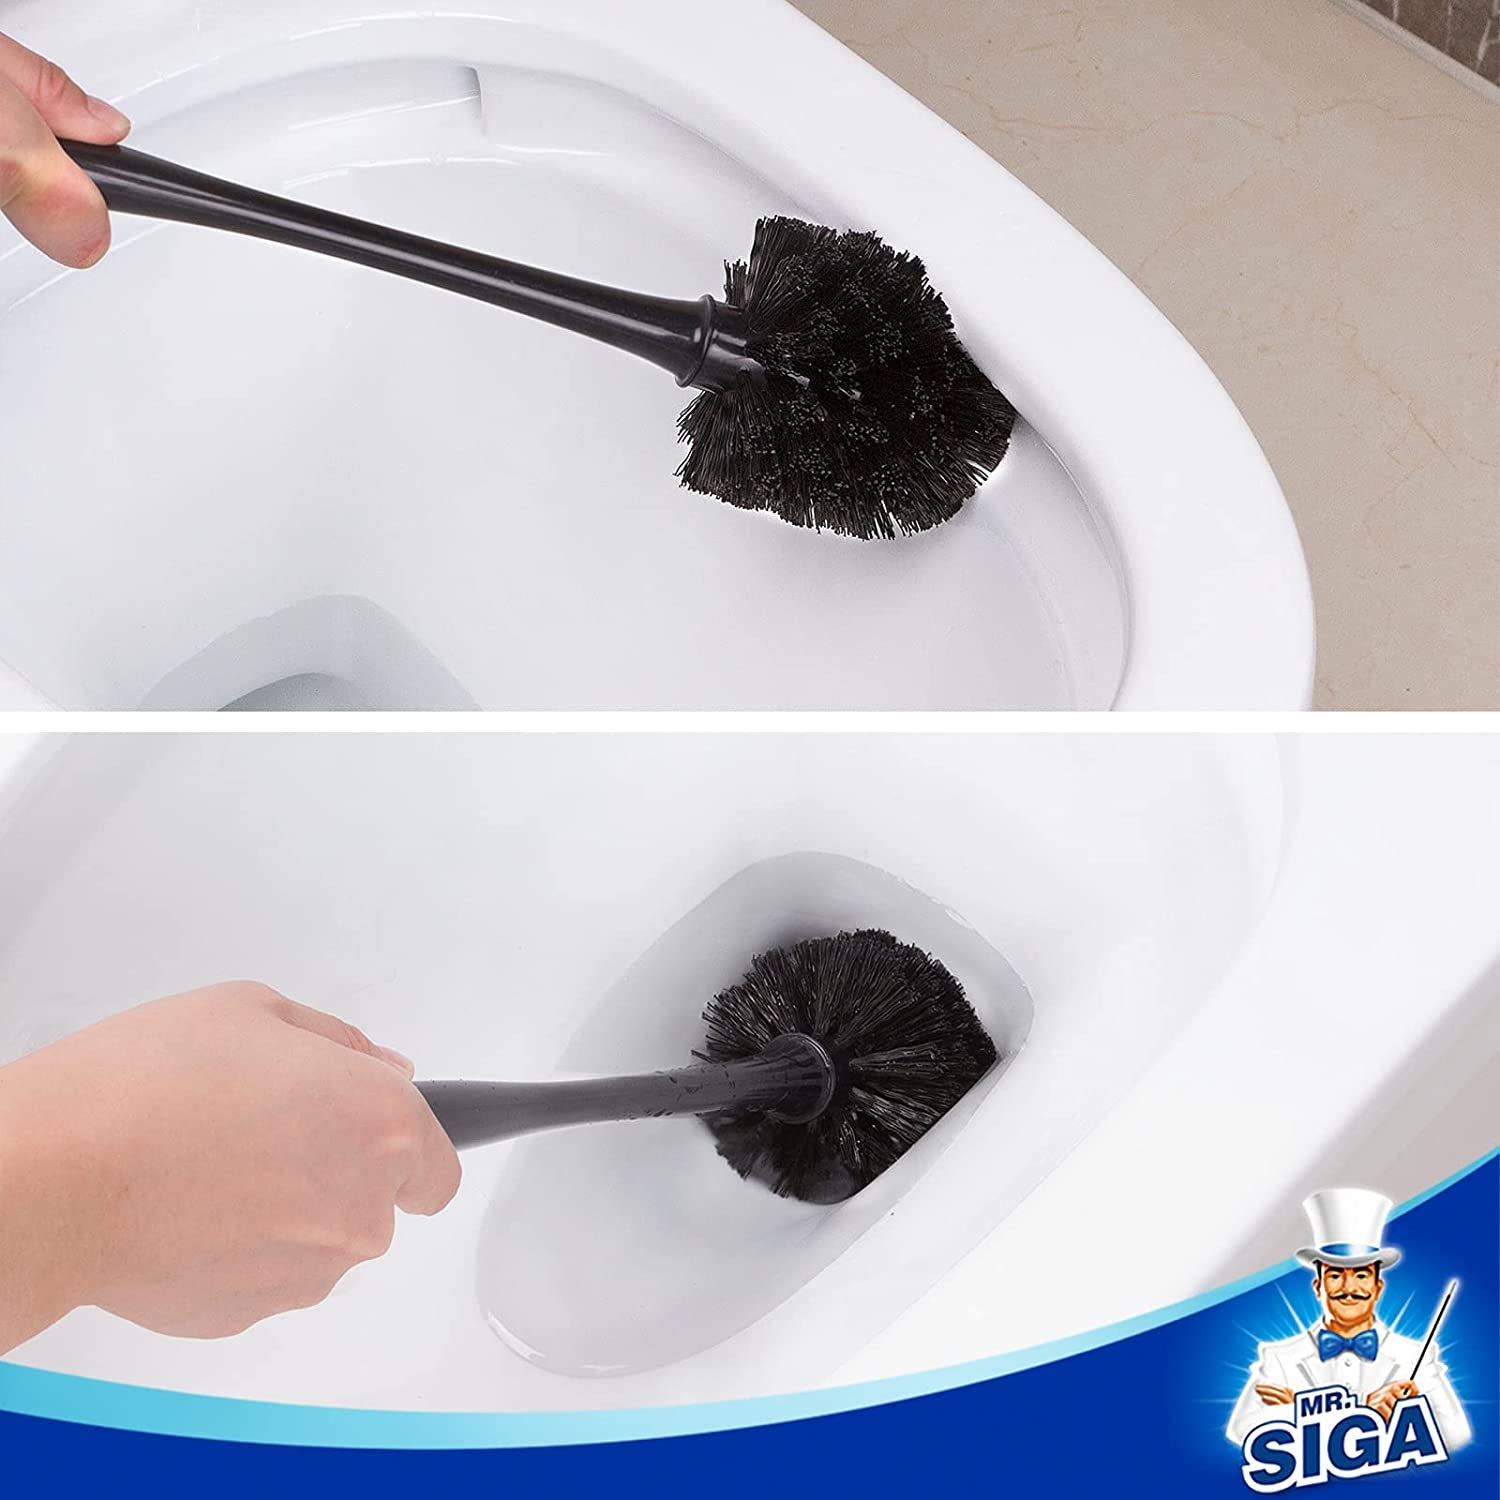 Toilet Plunger and Bowl Brush Combo for Bathroom Cleaning, Black, 1 Set